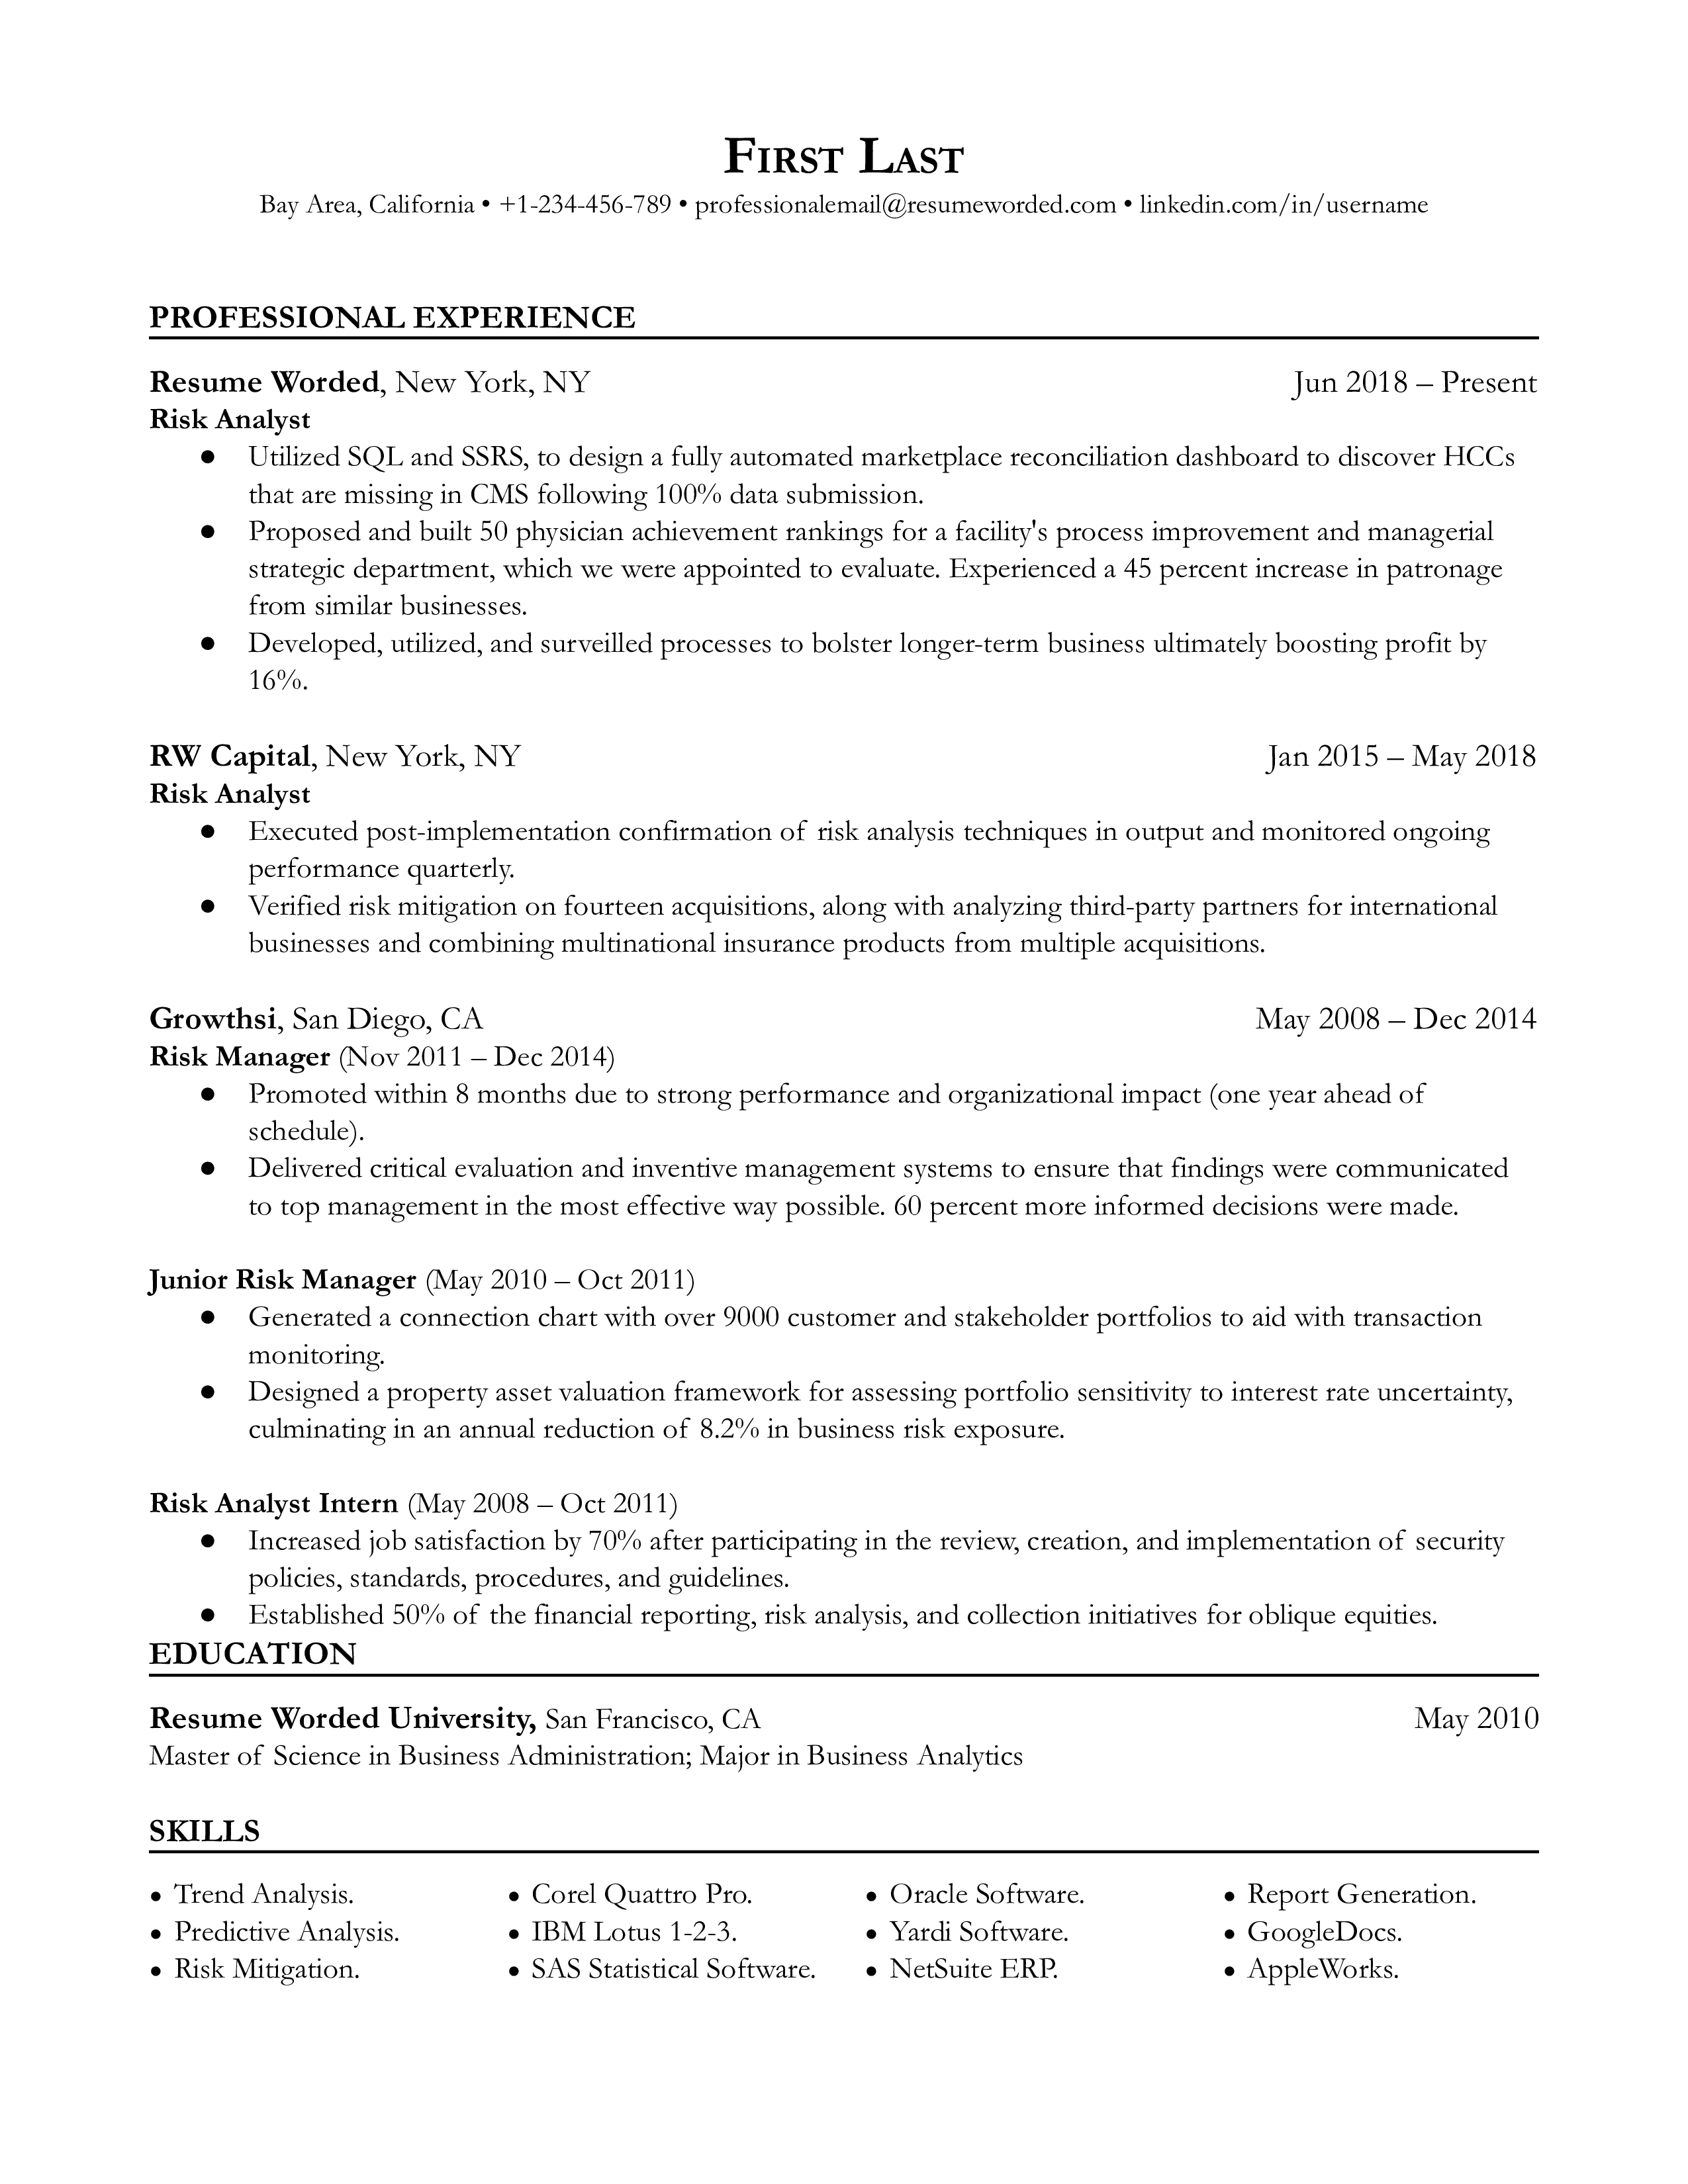 Risk Analyst Resume Template + Example